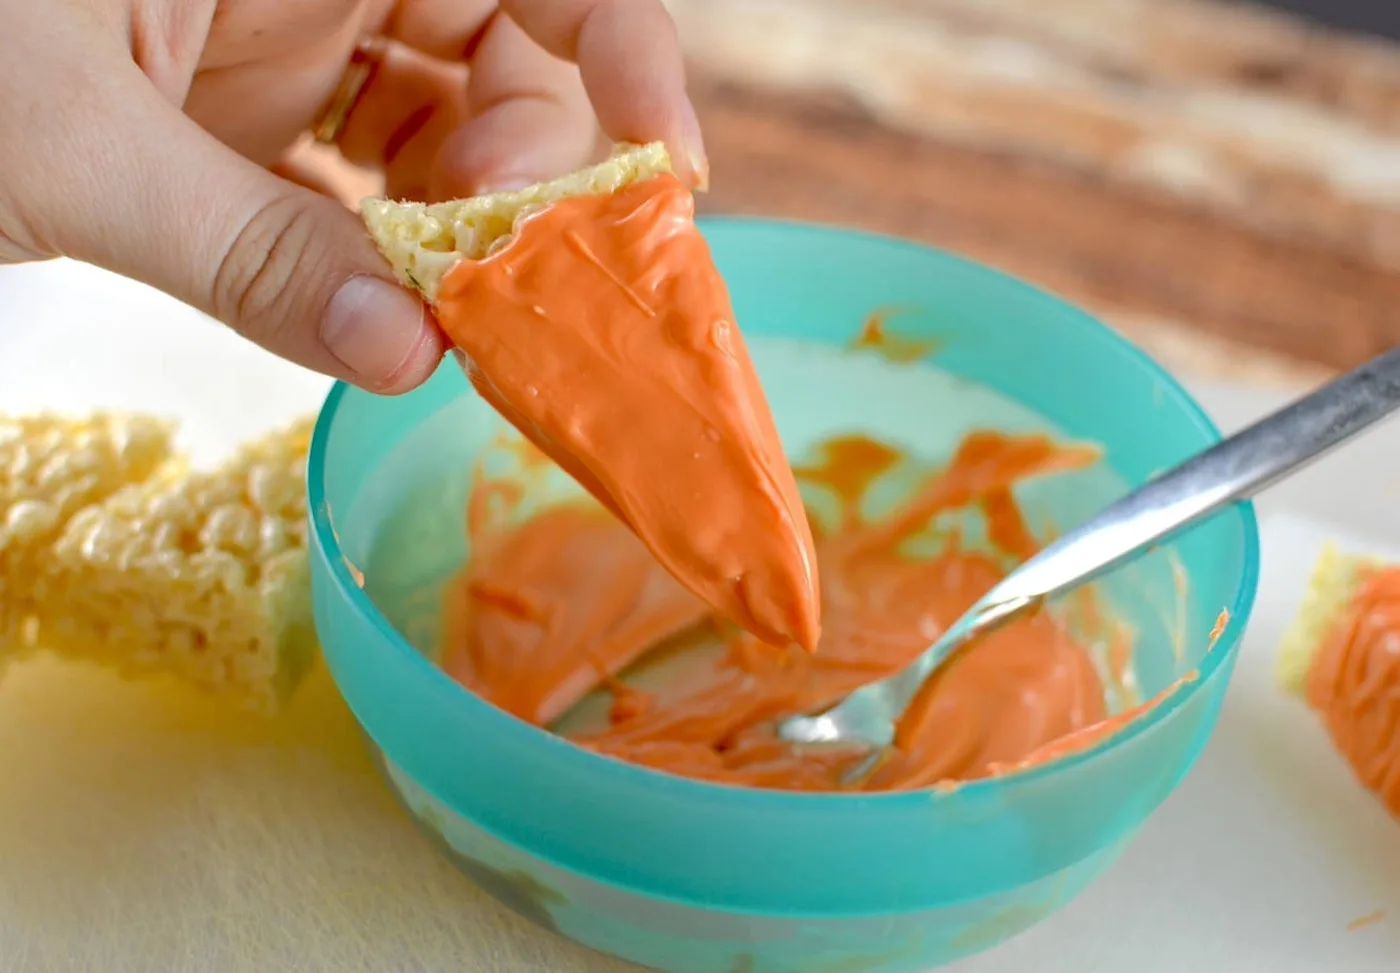 Dipping a rice krispie into orange candy melts